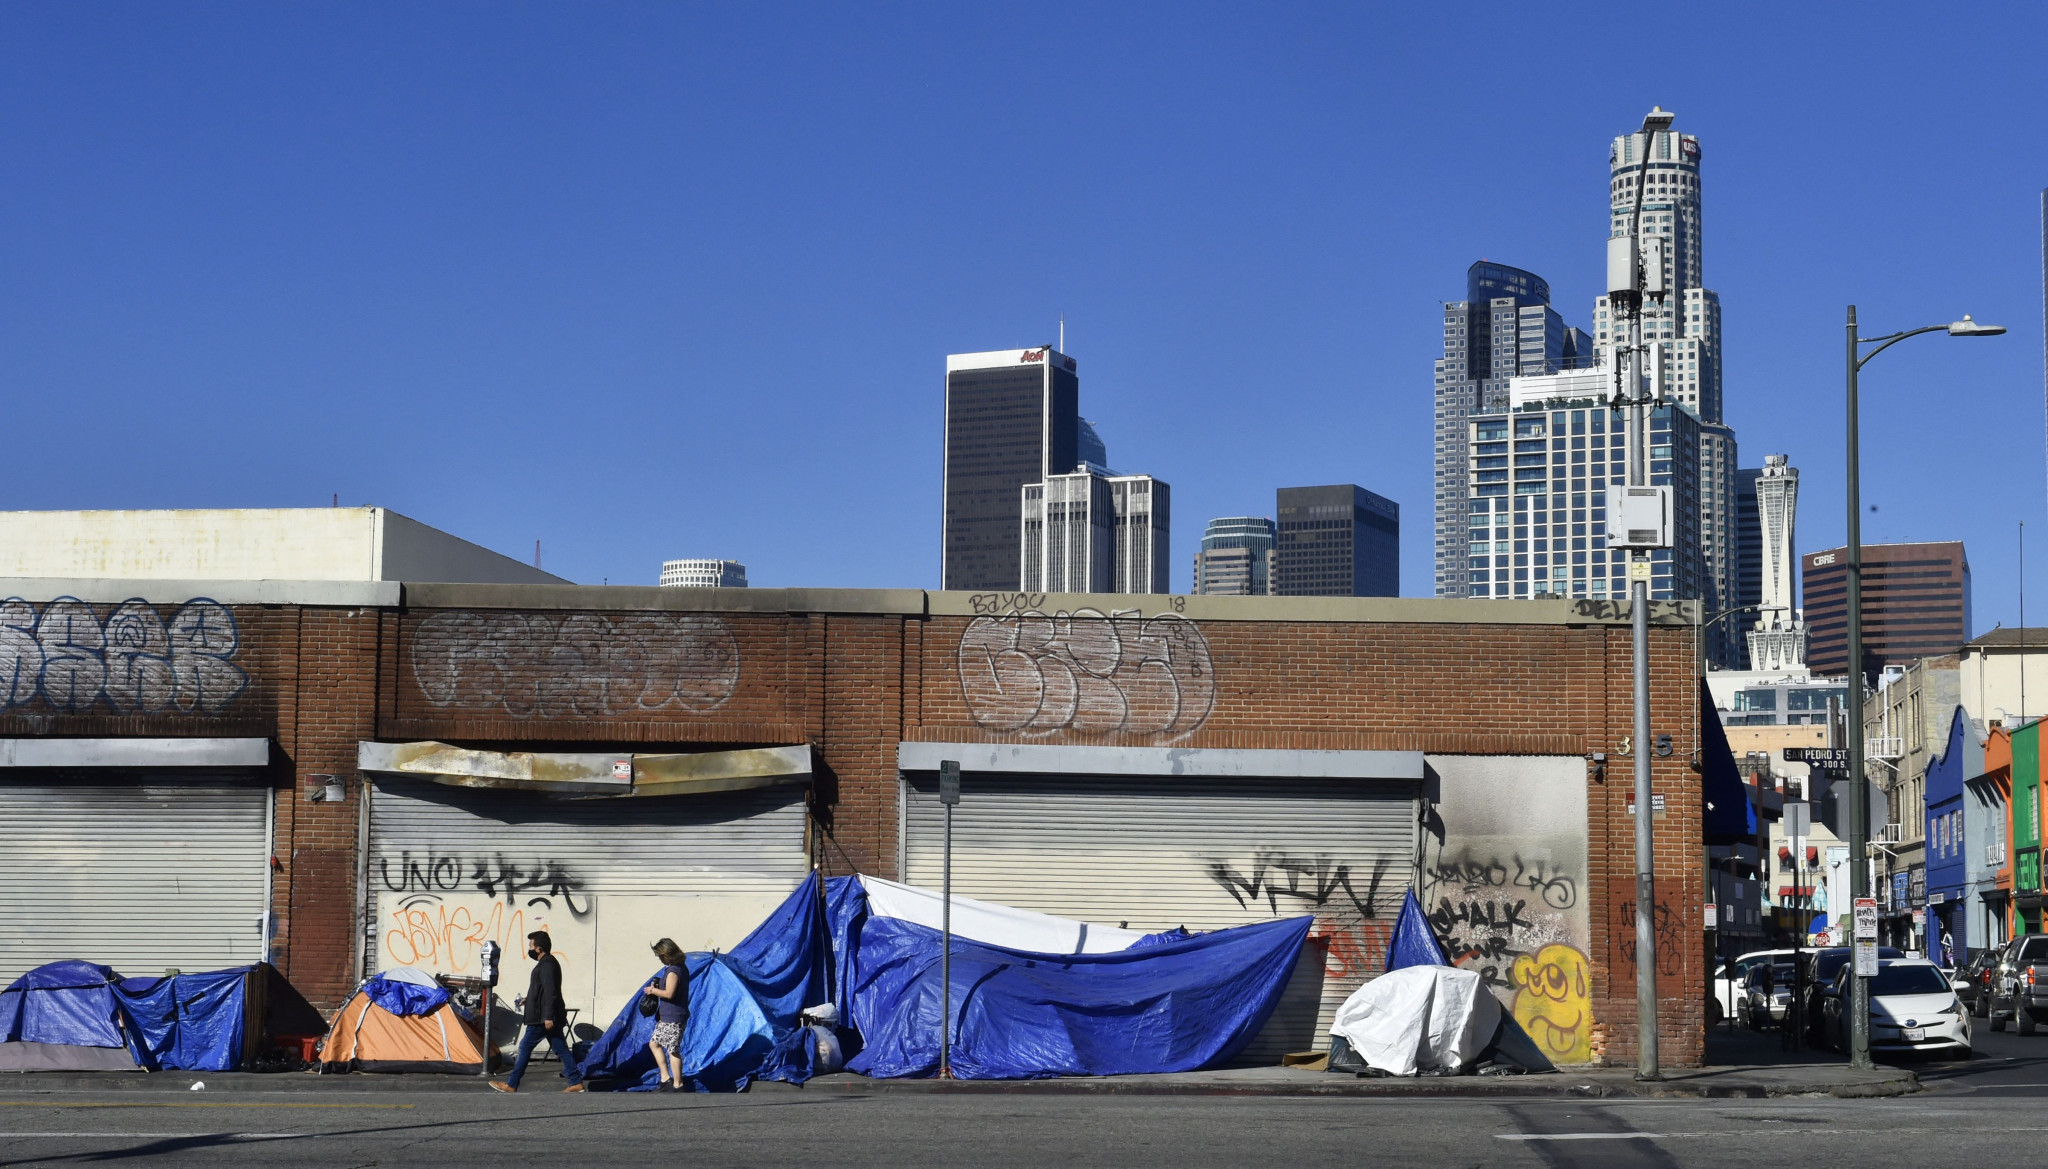 Homelessness remains a key concern in the build-up to the Los Angeles 2028 Olympics and Paralympics ©Getty Images